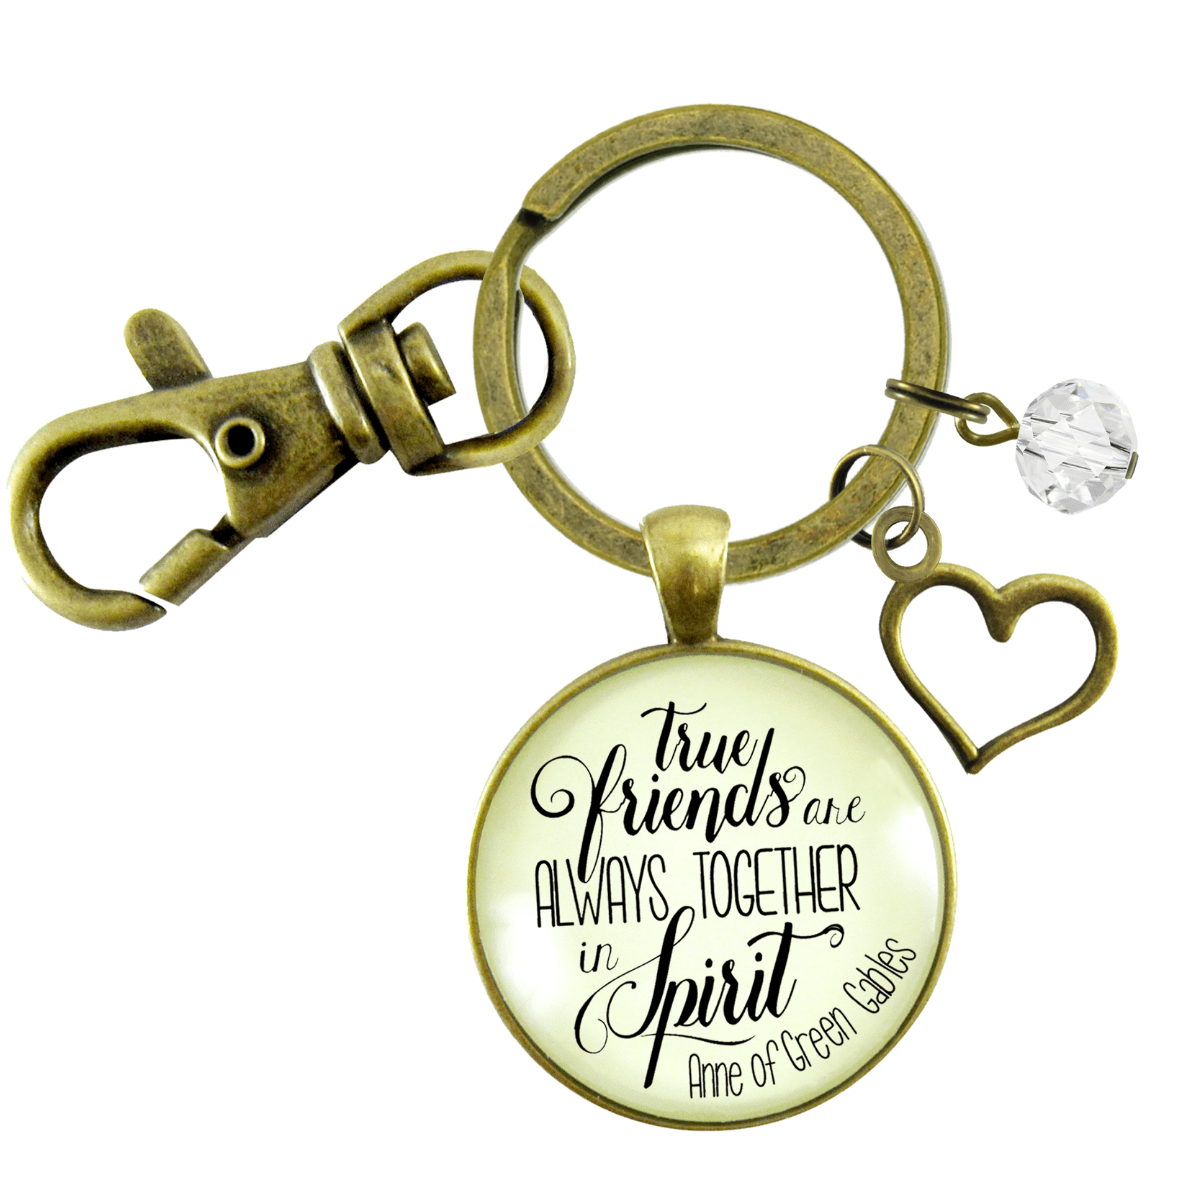 True Friends Are Always Together Keychain Literary Quote Heart Jewelry - Gutsy Goodness Handmade Jewelry;True Friends Are Always Together Keychain Literary Quote Heart Jewelry - Gutsy Goodness Handmade Jewelry Gifts